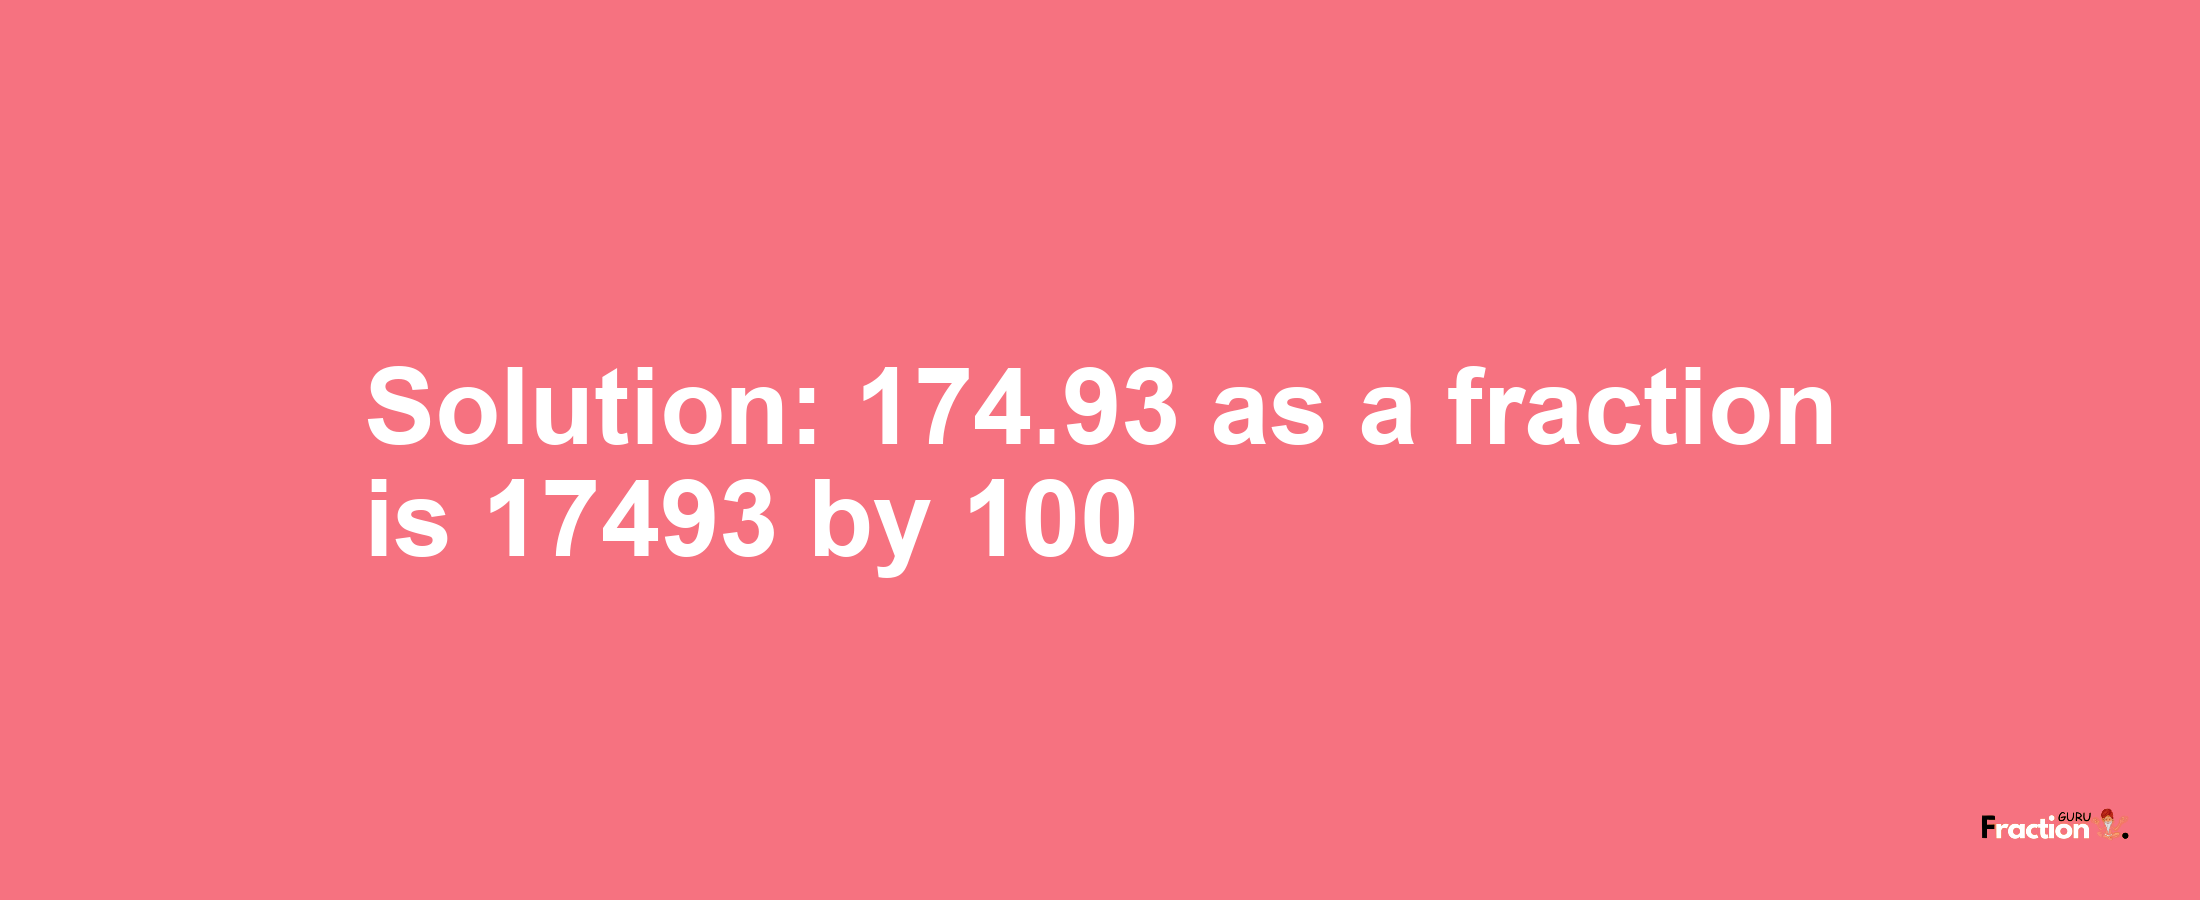 Solution:174.93 as a fraction is 17493/100